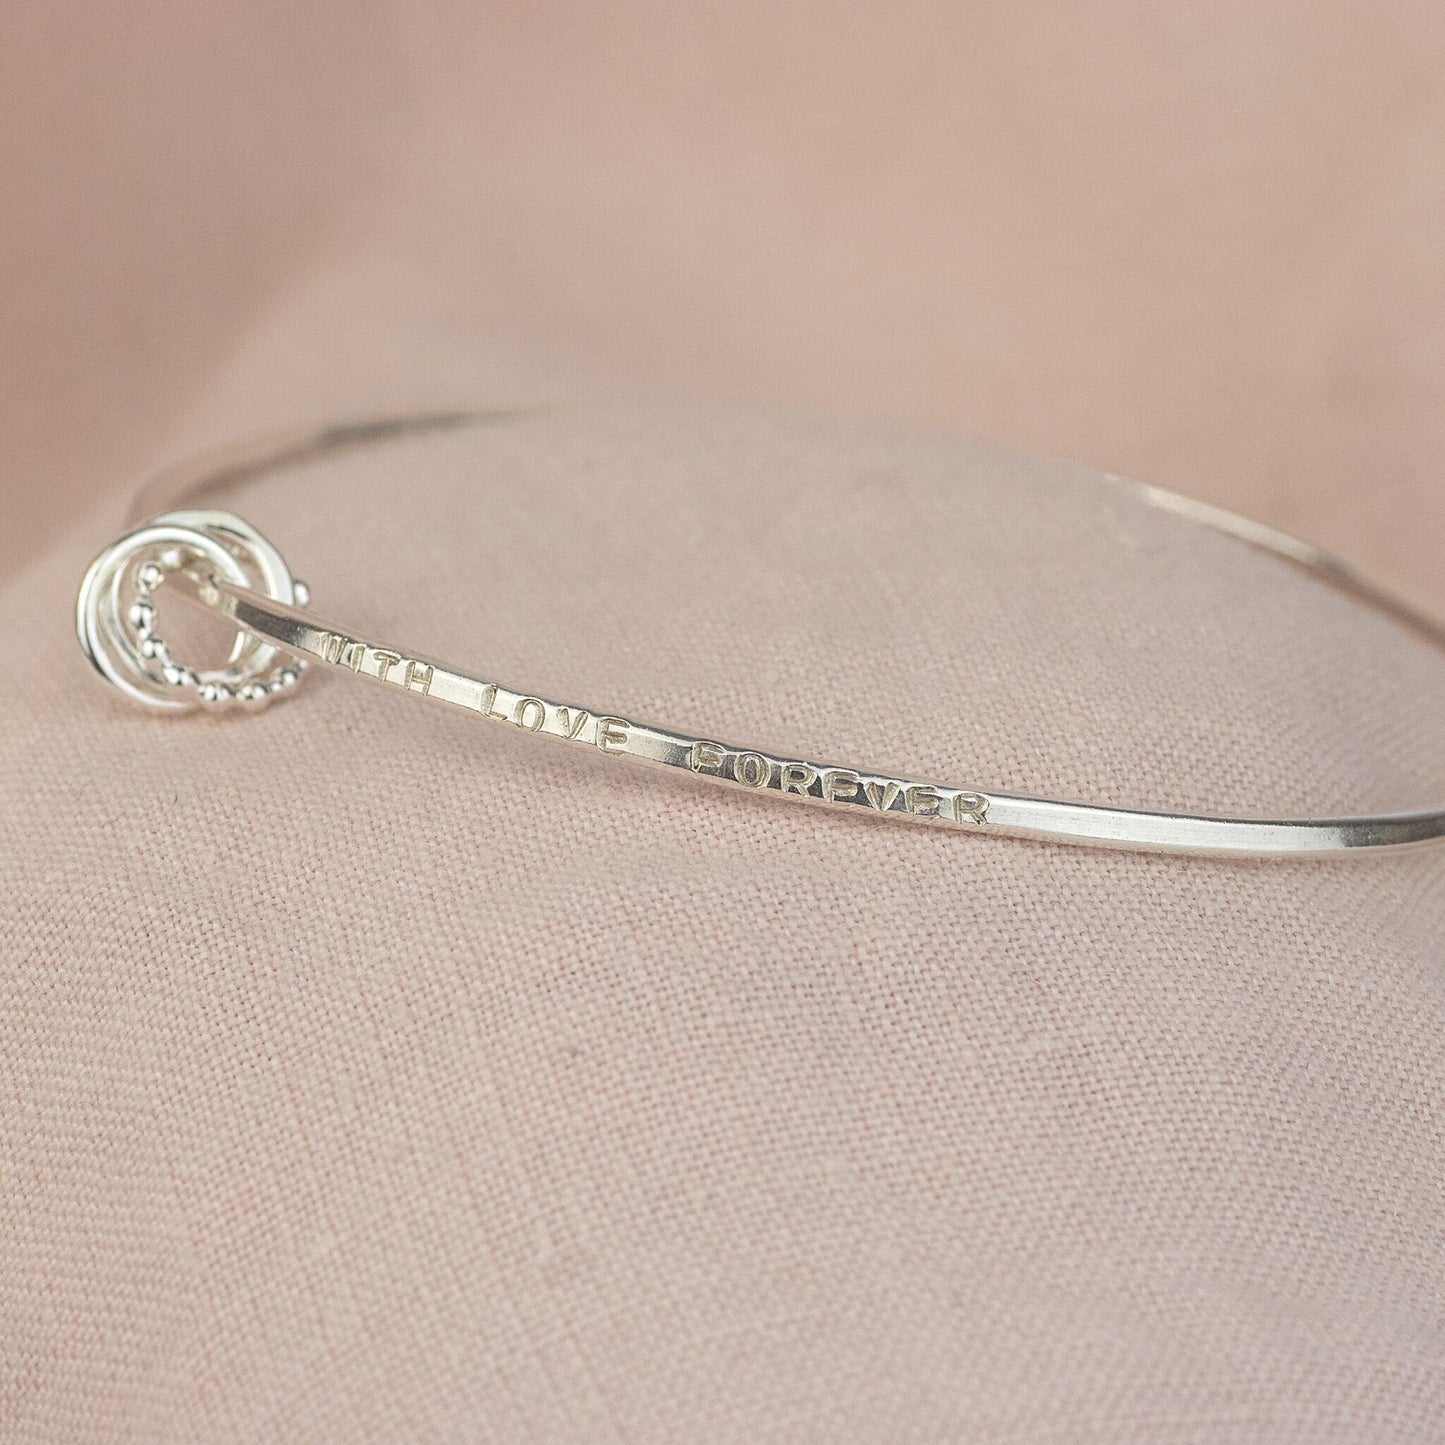 Personalised 30th Birthday Bracelet - 3 Links for 3 Decades - Silver Love Knot